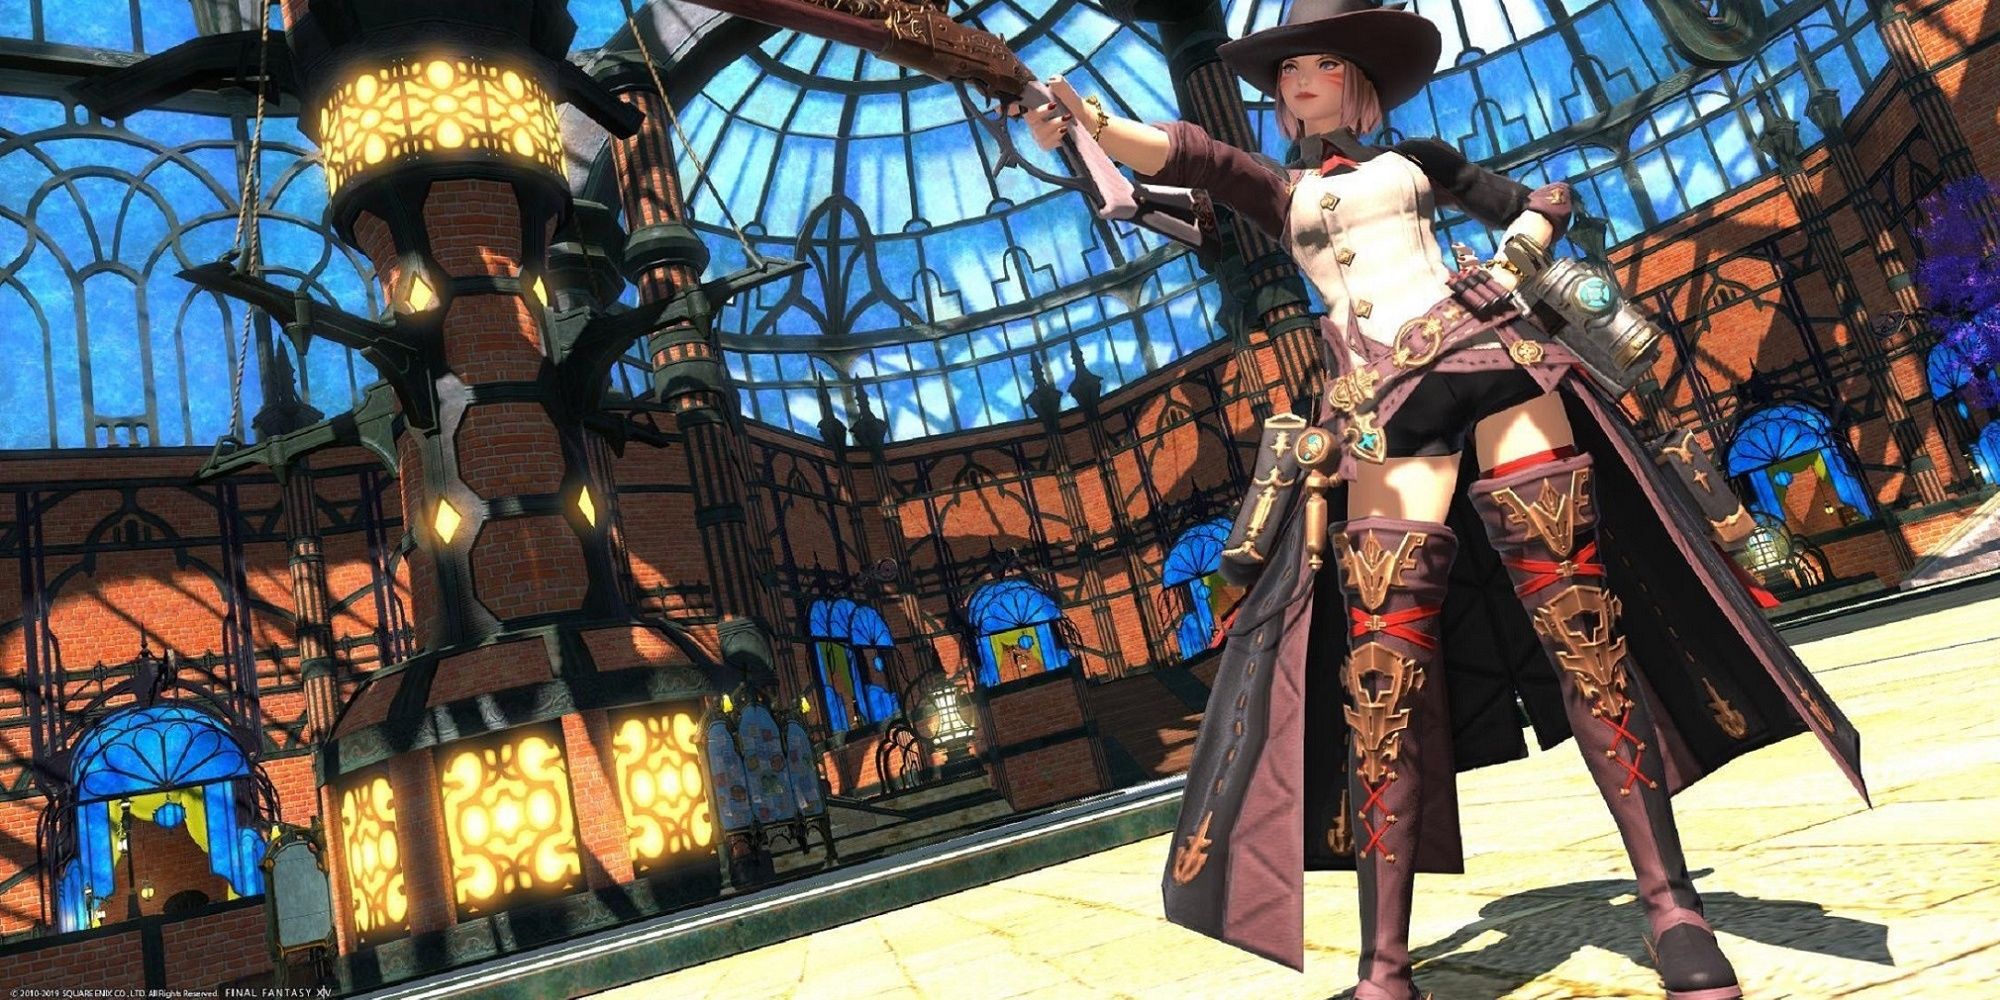 Miquote machinist posing and holding a gun forward with beautiful stained glass windows in background